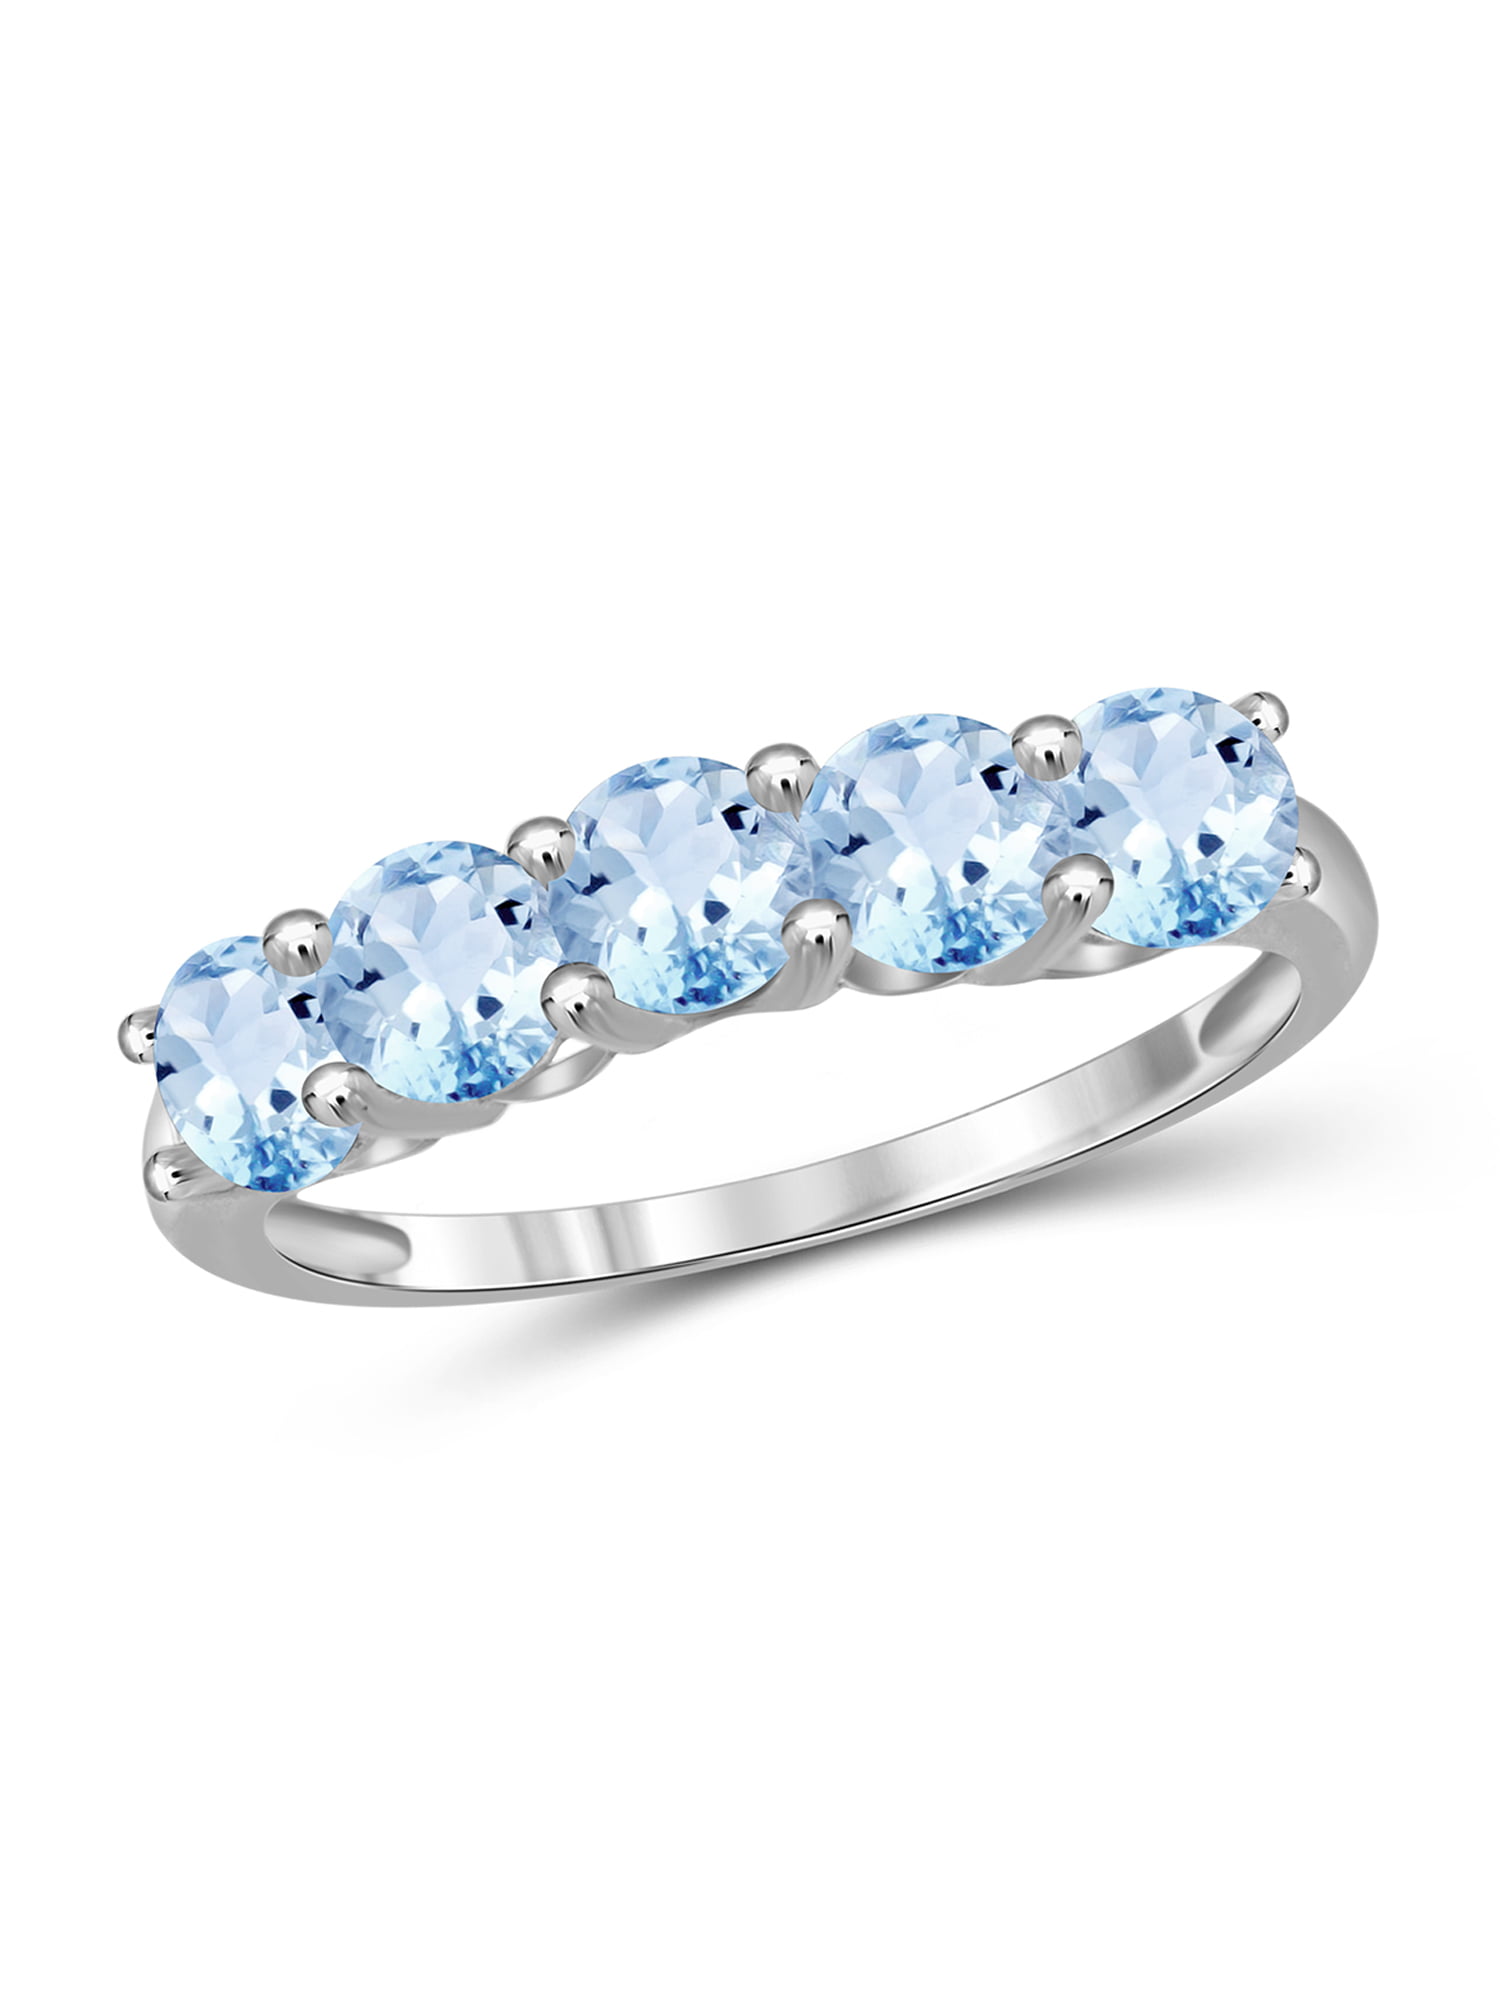 Hutang Gems Jewelry | Rings Cushion | Topaz - Natural Blue Sterling Silver  Rings Design - Aliexpress